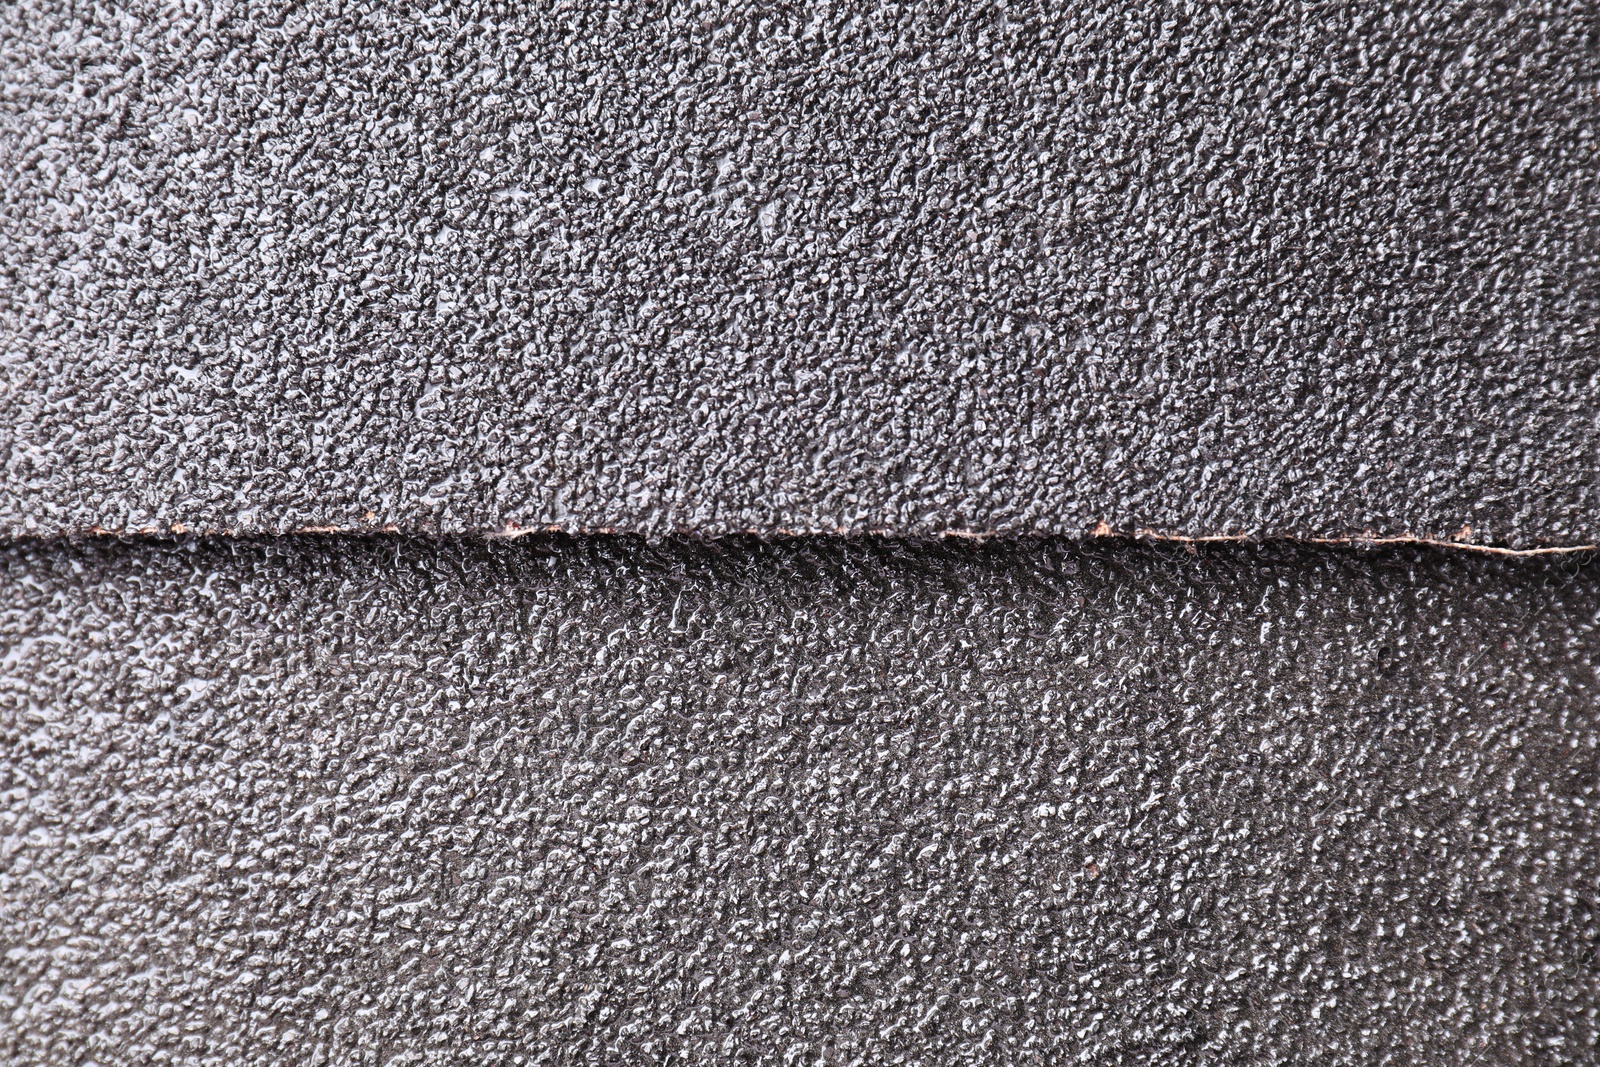 Photo of Sheets of coarse sandpaper as background, top view